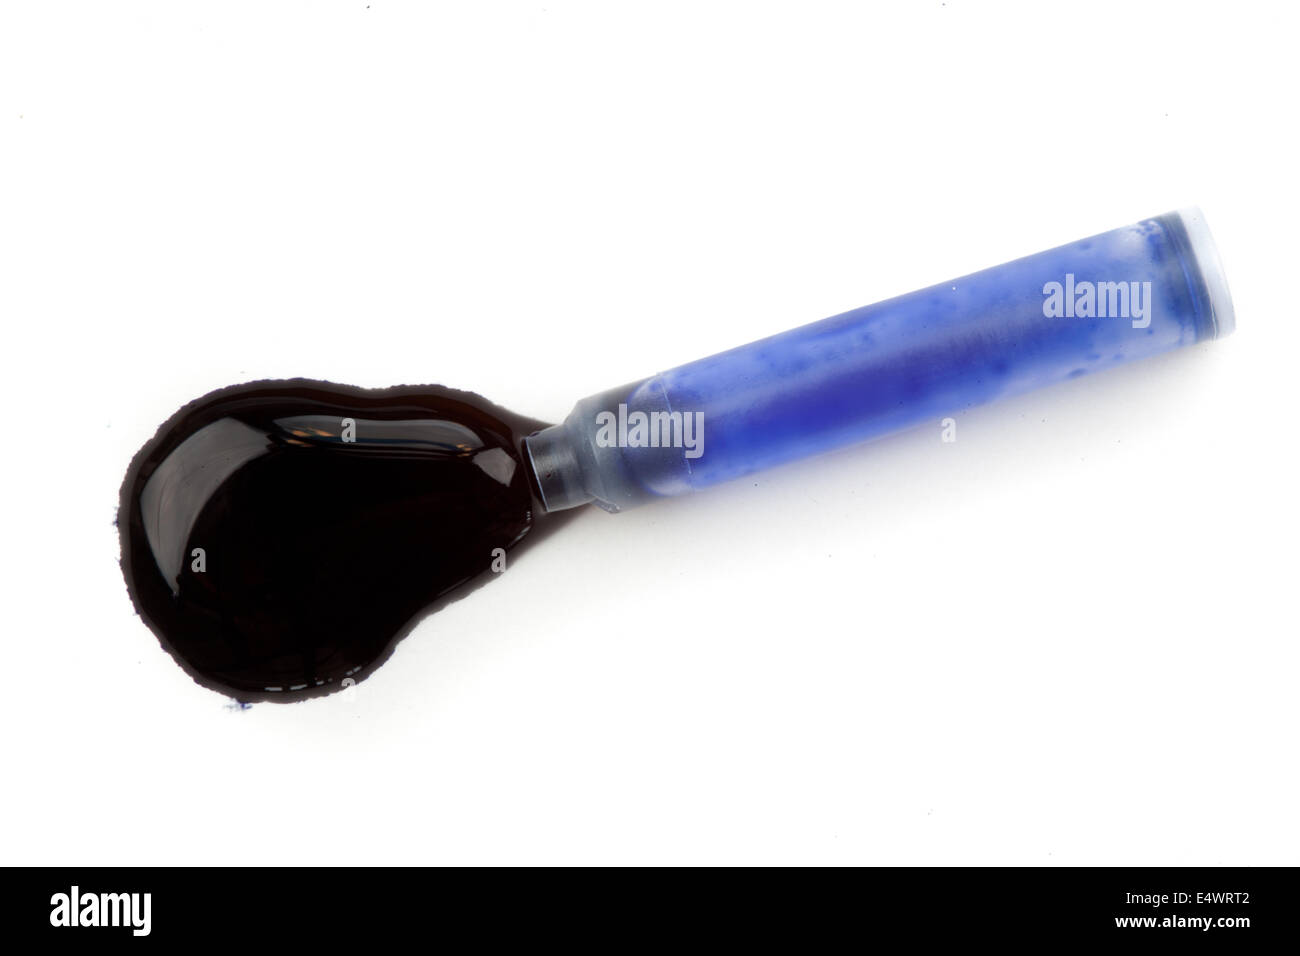 Blue ink Stock Photo